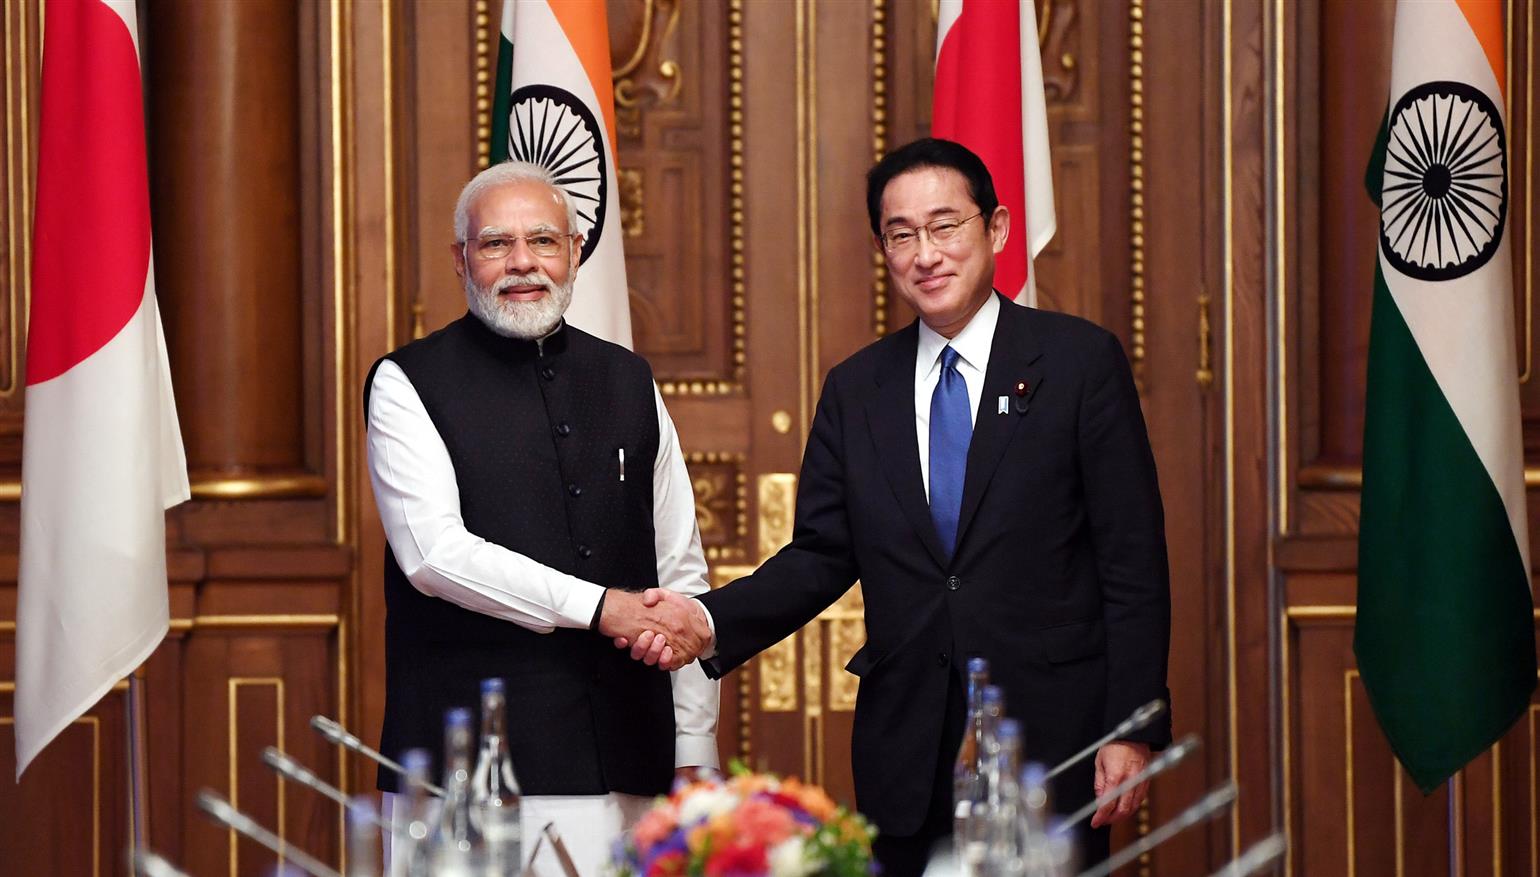 Japan to Invest 5 Trillion Yen in India, CW report